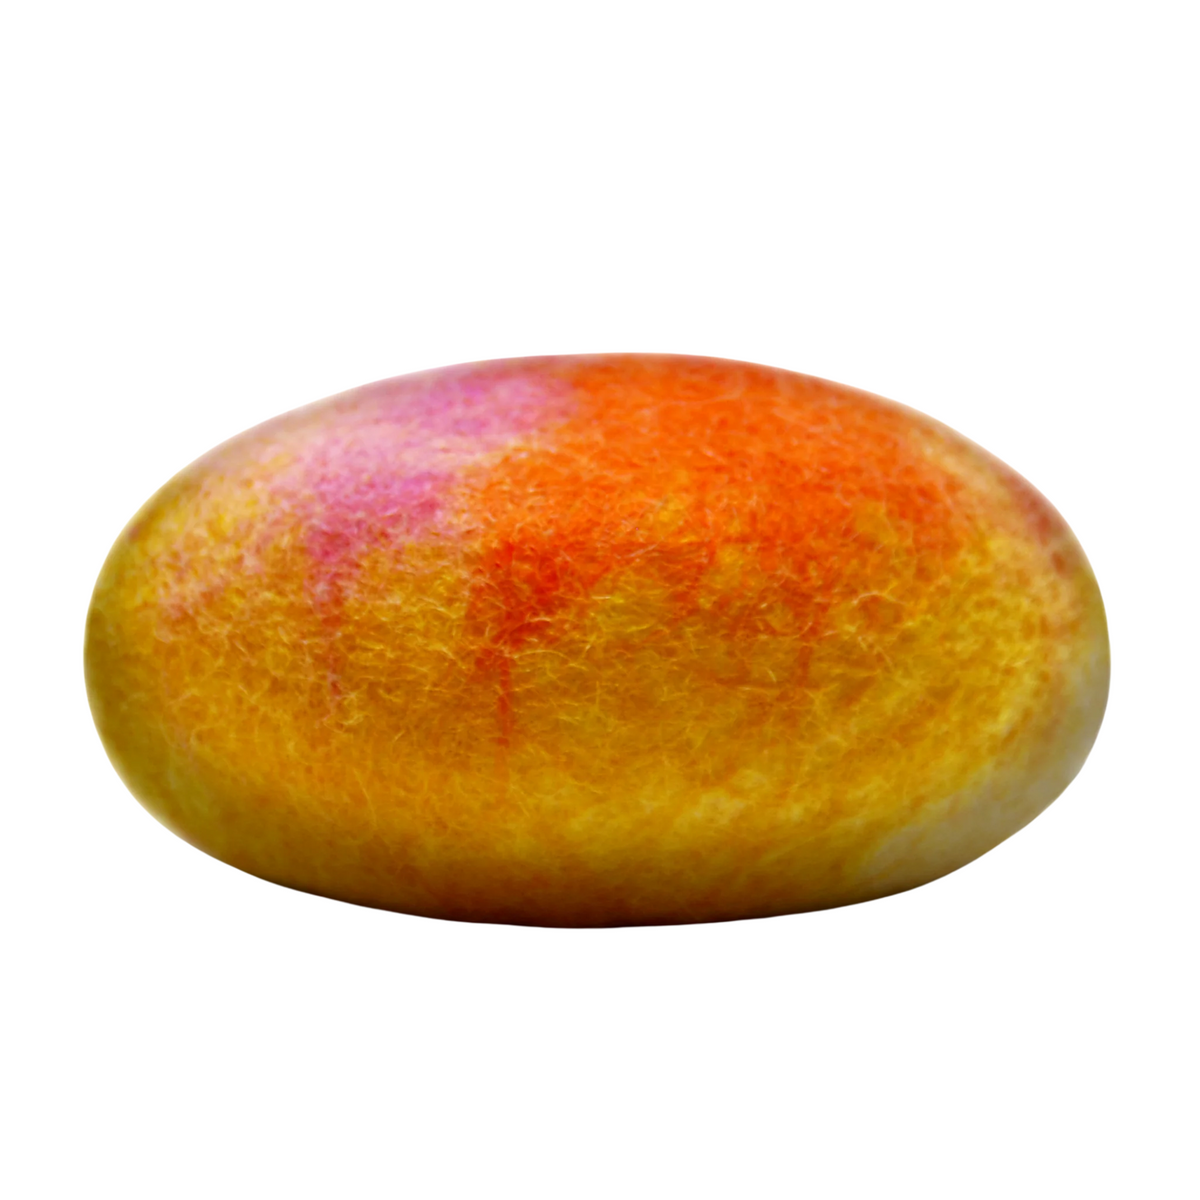 Close-up image of a Fiat Luxe - Classic Lemon Zest Felted Soap shaped like a single mango with a gradient of yellow, orange, and red colors, isolated on a white background.